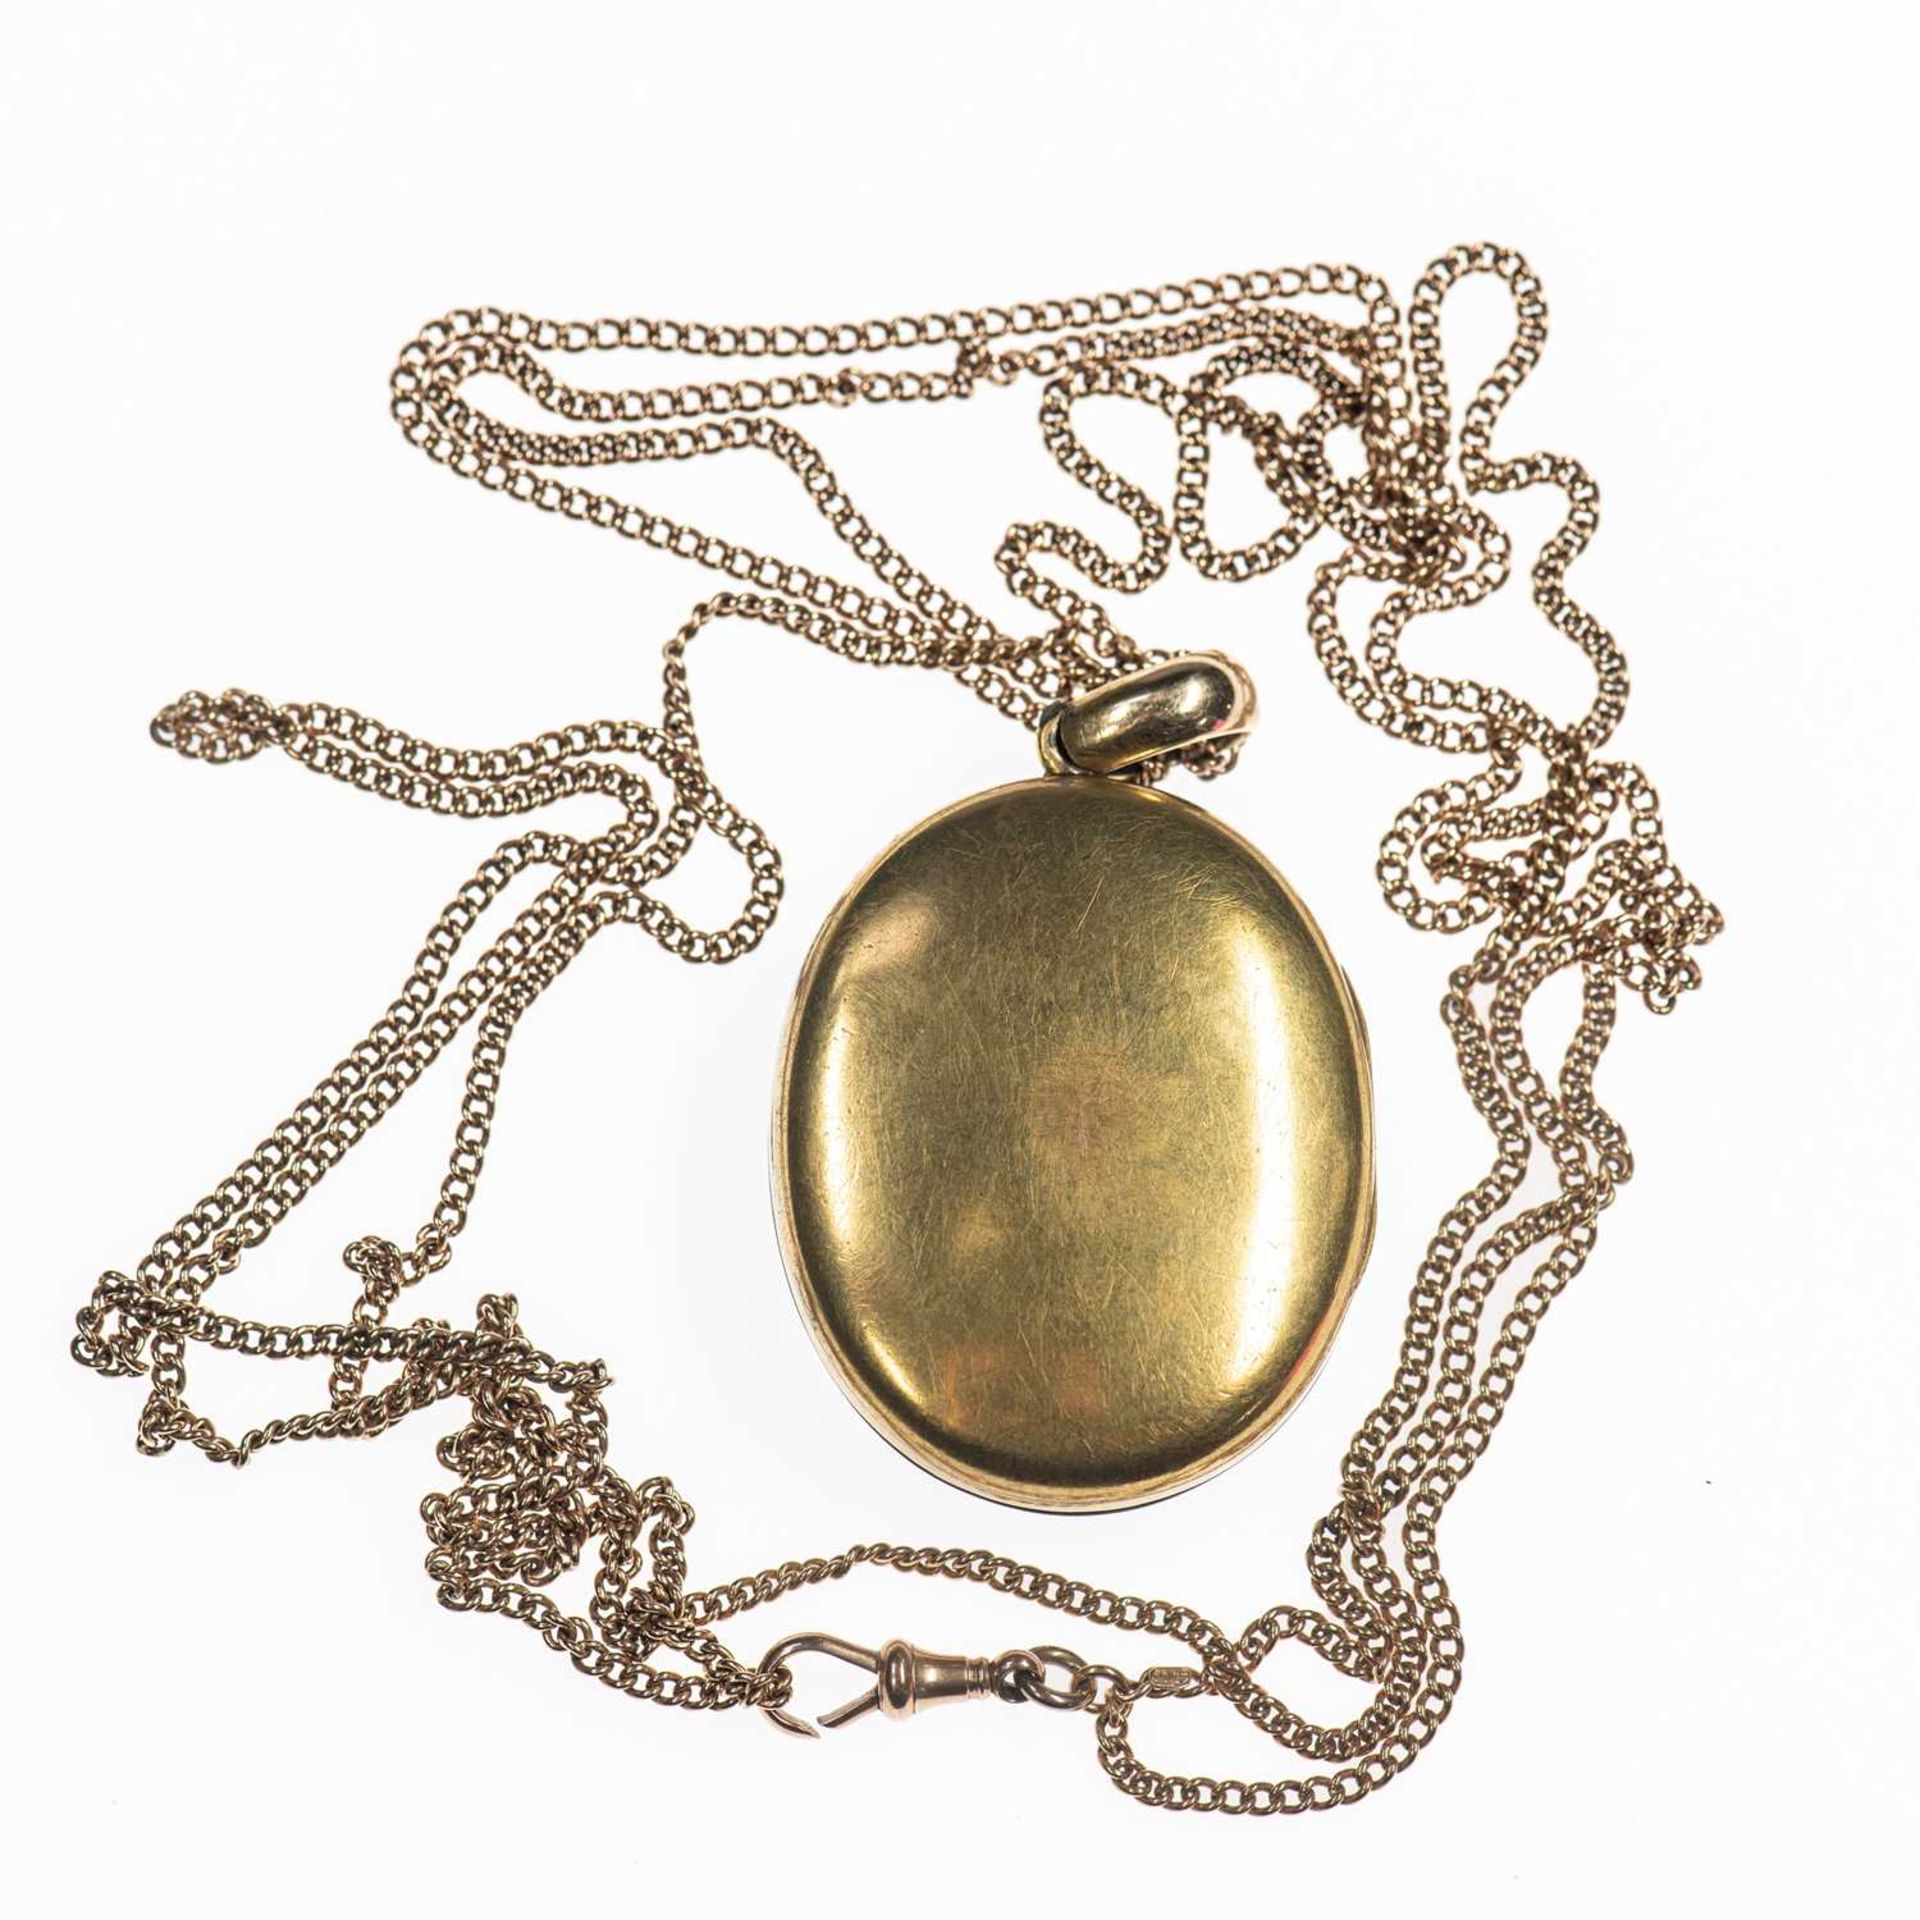 A VICTORIAN ONYX AND DIAMOND MOURNING LOCKET PENDANT ON CHAIN - Image 4 of 4